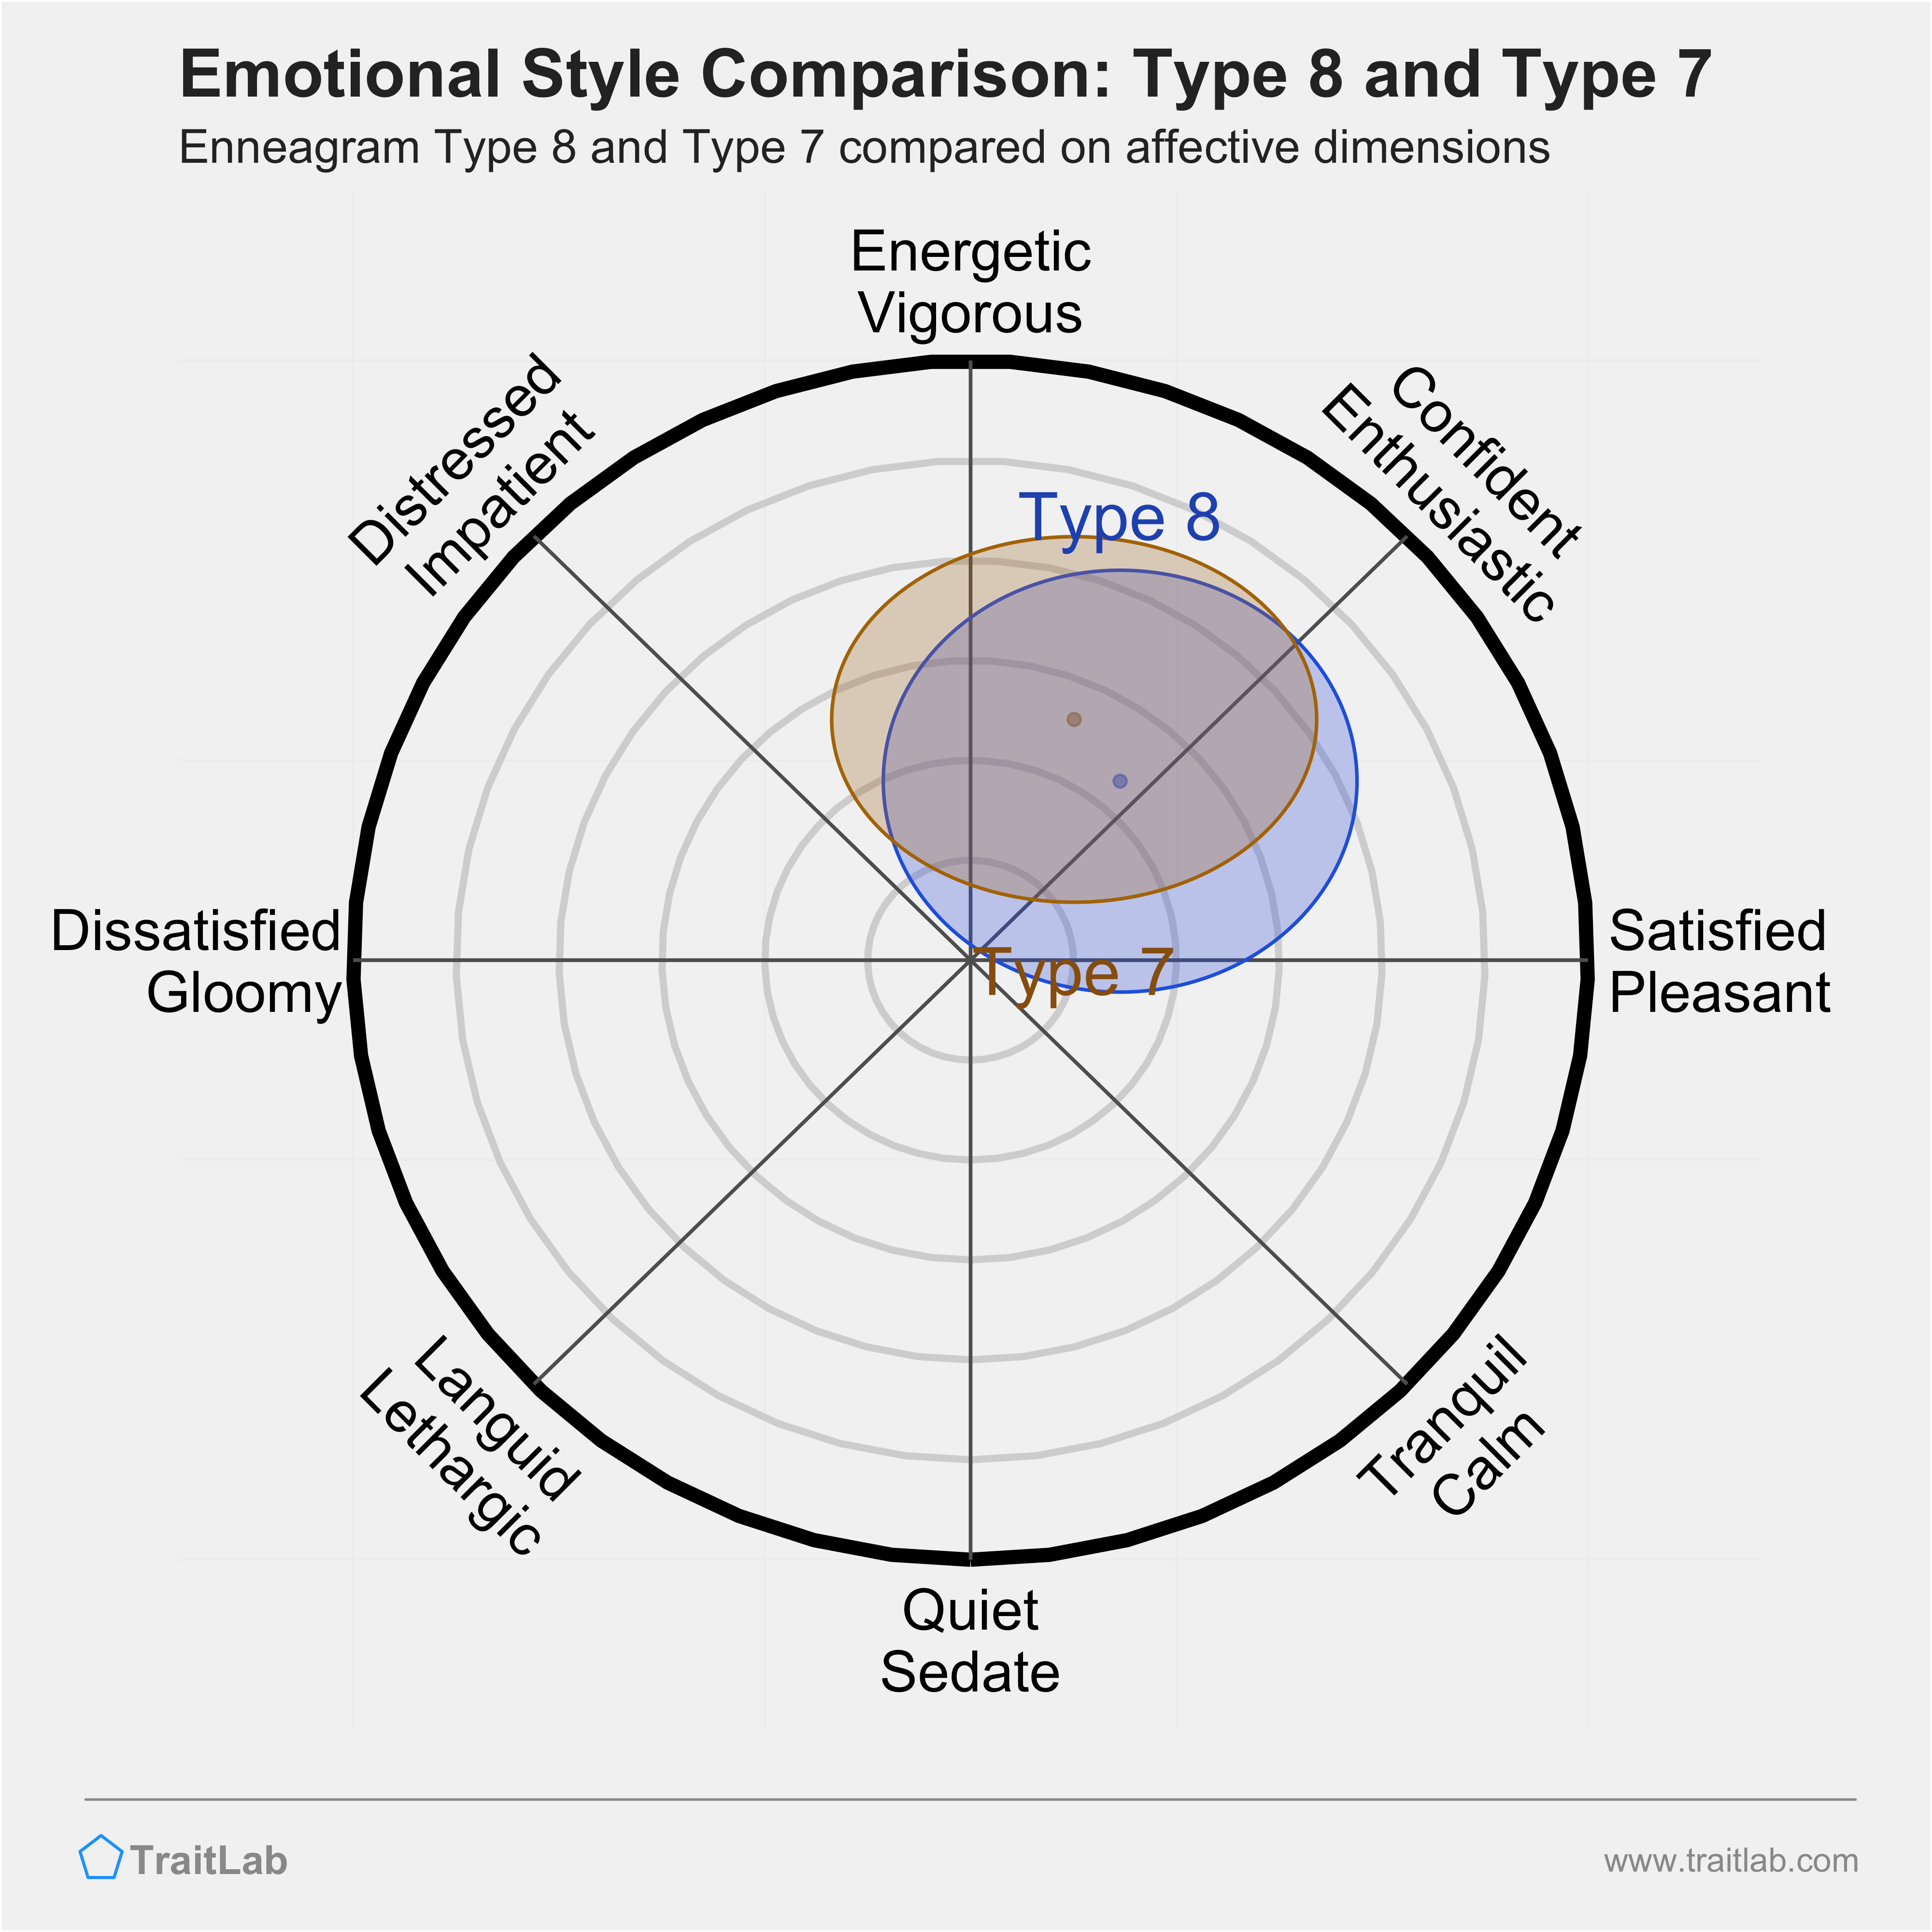 Type 8 and Type 7 comparison across emotional (affective) dimensions